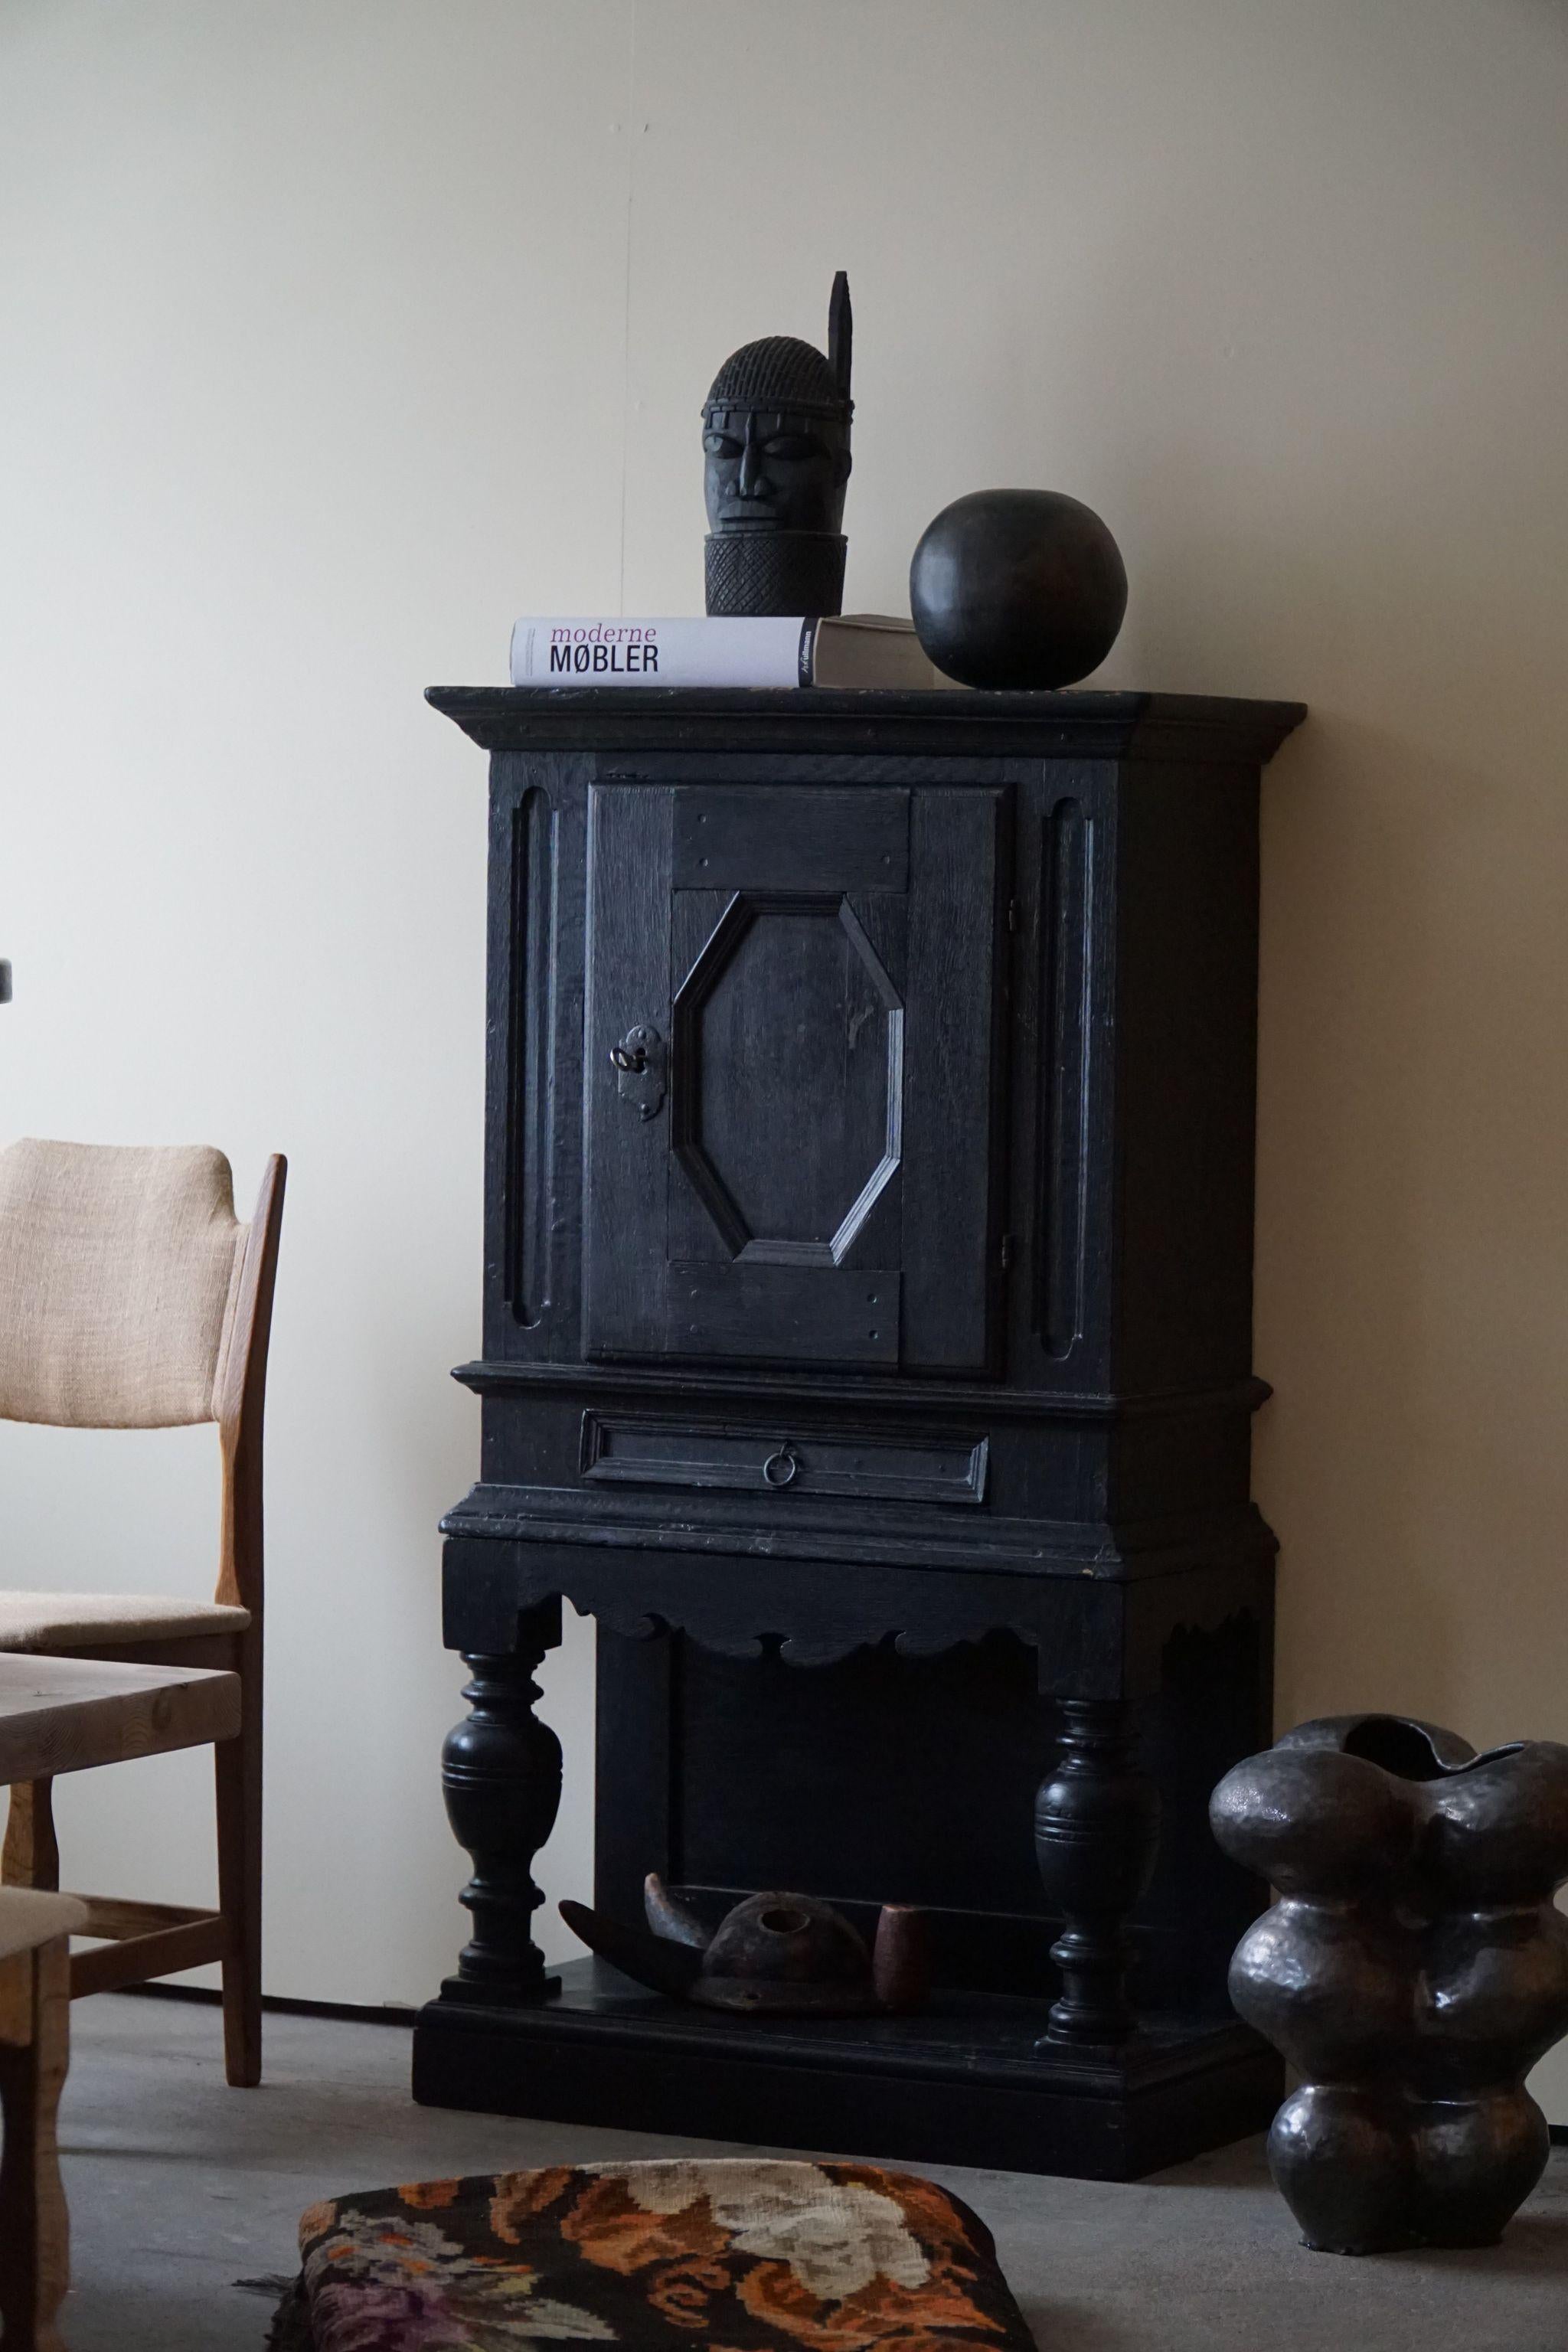 18th Century, Antique Black Painted Cabinet by a Danish Cabinetmaker, Baroque In Fair Condition For Sale In Odense, DK